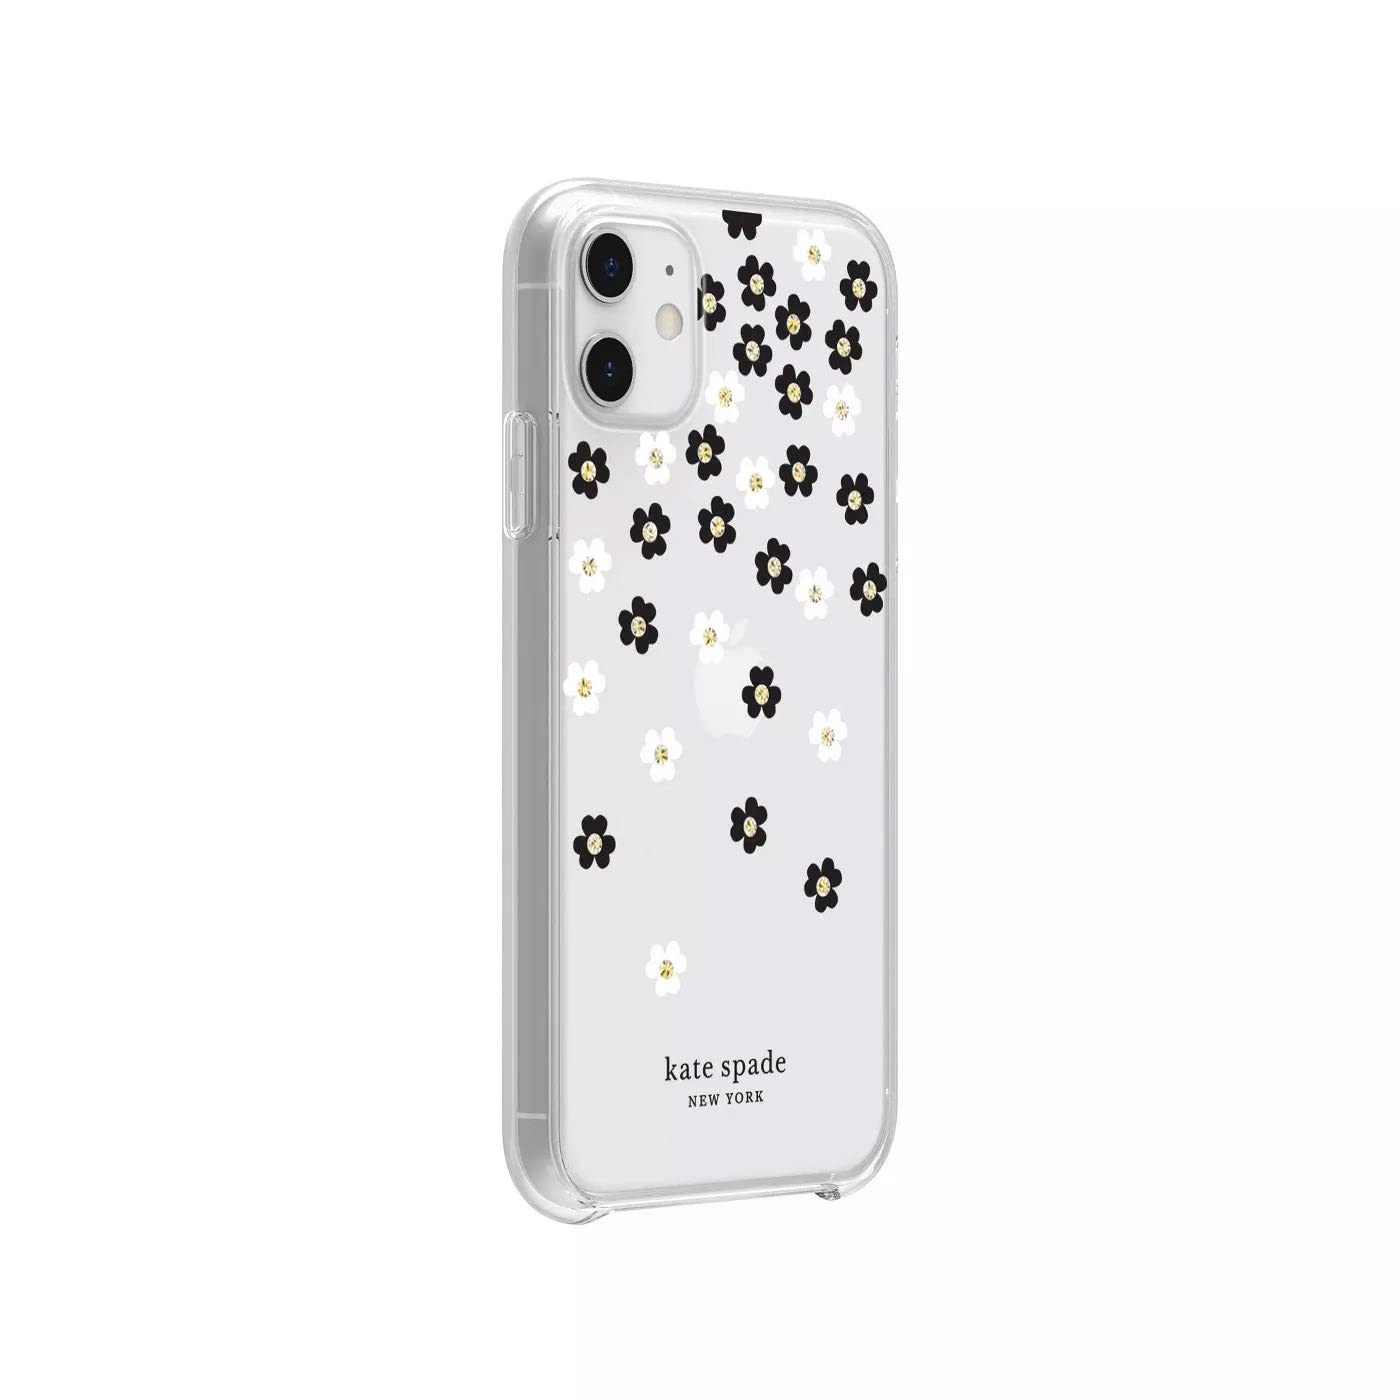 Kate Spade New York Protective Hardshell Case for iPhone 12 & iPhone 12 Pro - Scattered Flowers Black/White/Gold Gems/Clear/White Bumper, KSIPH153SFLBW